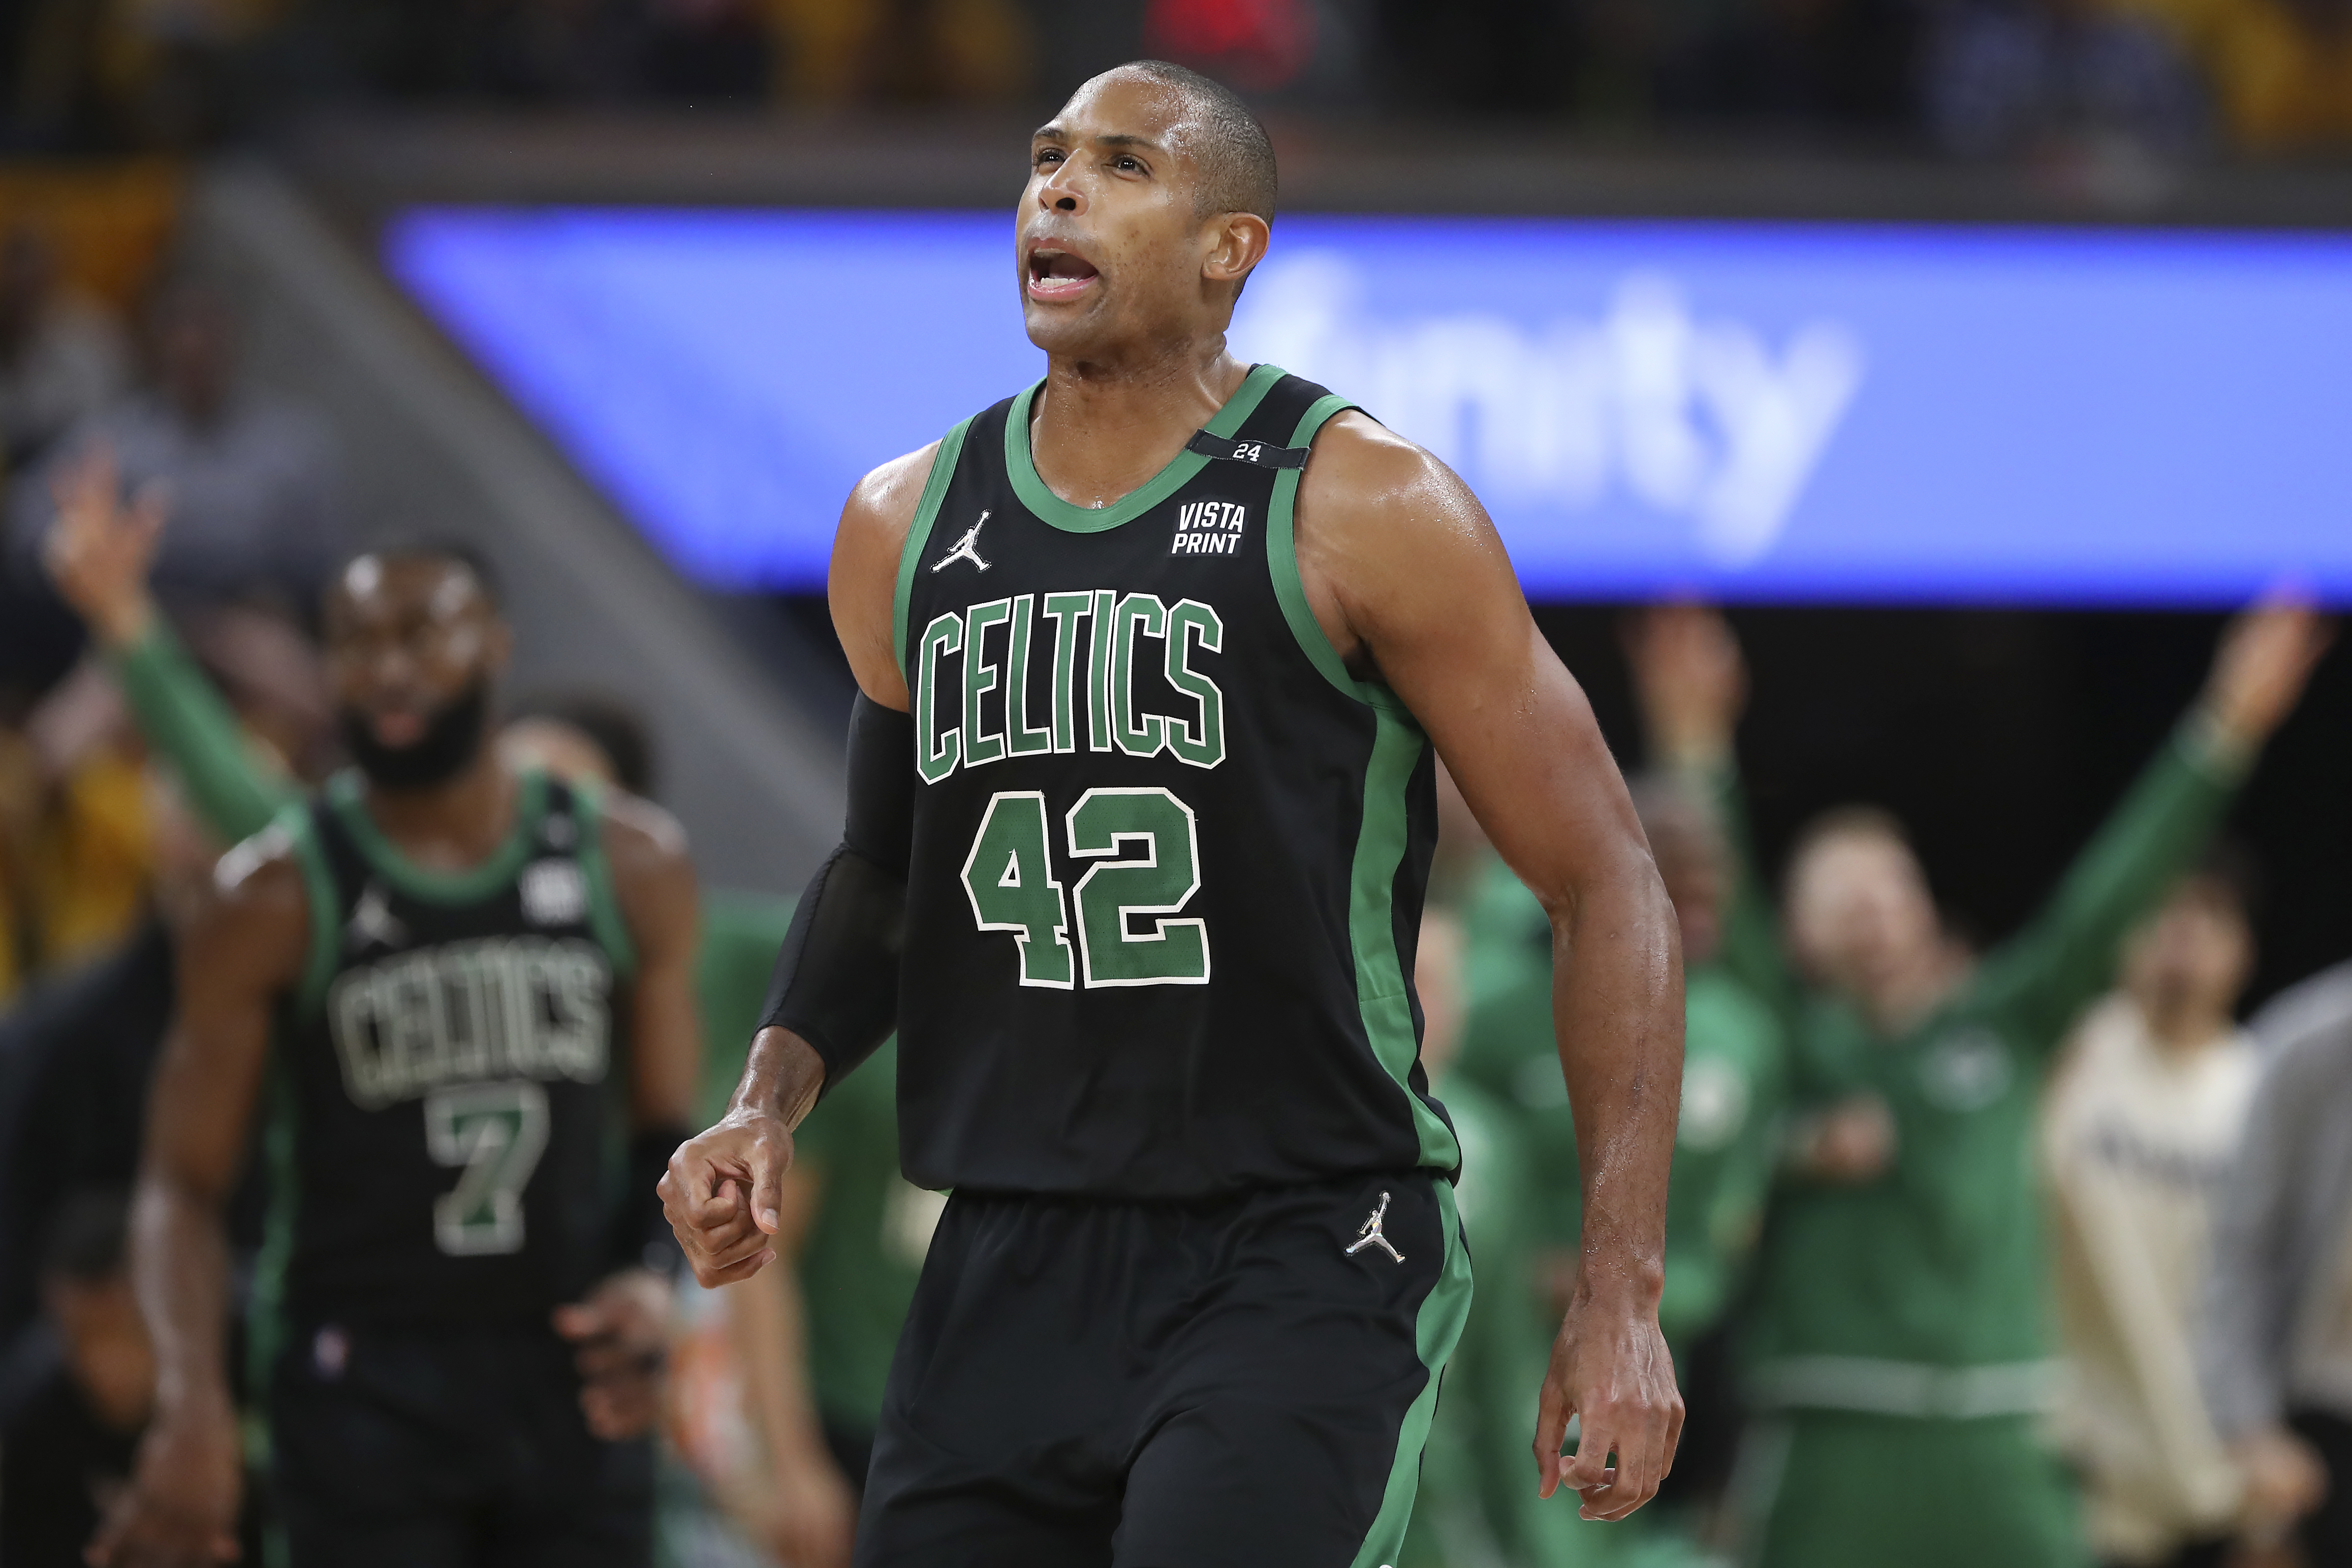 Al Horford Fuels Celtics With Playoff Career-High 30 PTS 🔥 